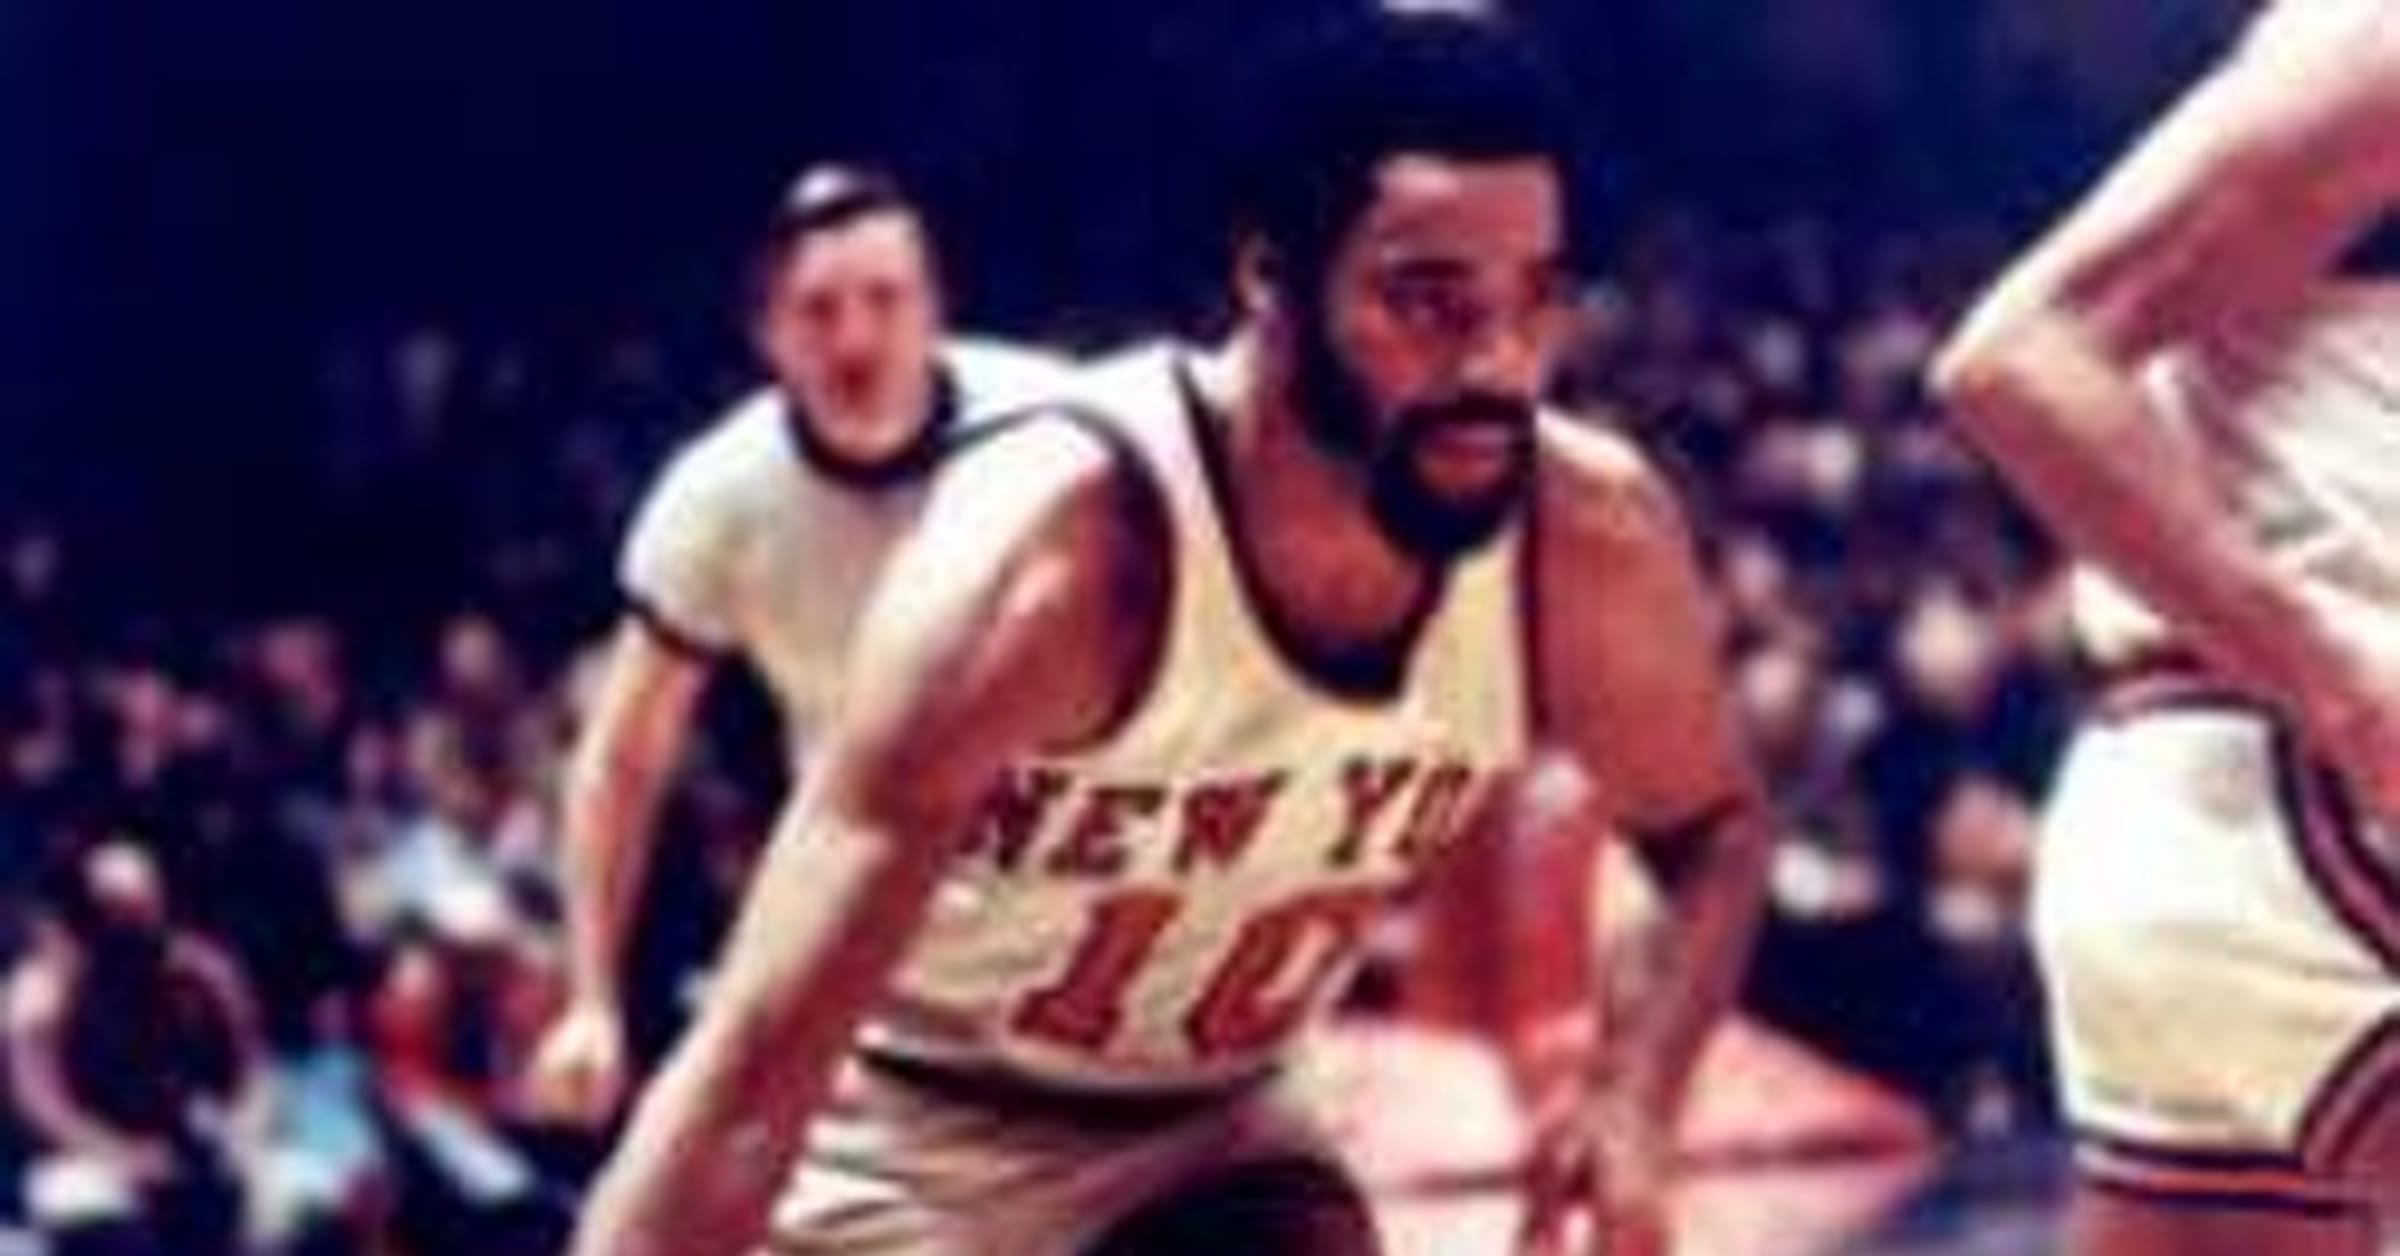 Who are the Top 10 Knicks players of all time? - Quora